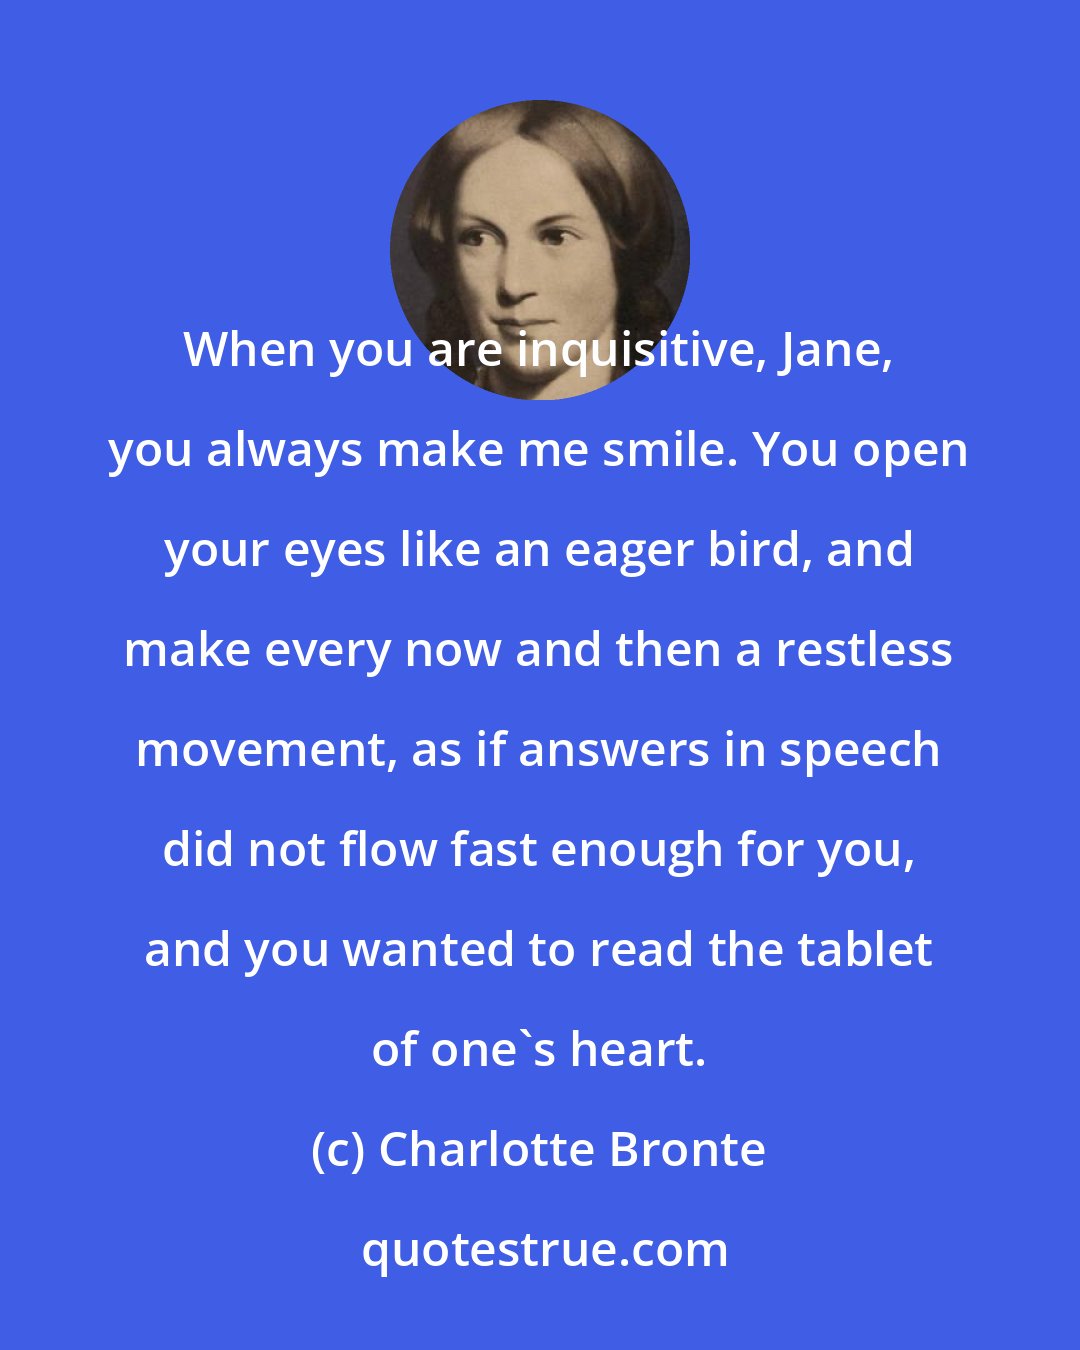 Charlotte Bronte: When you are inquisitive, Jane, you always make me smile. You open your eyes like an eager bird, and make every now and then a restless movement, as if answers in speech did not flow fast enough for you, and you wanted to read the tablet of one's heart.